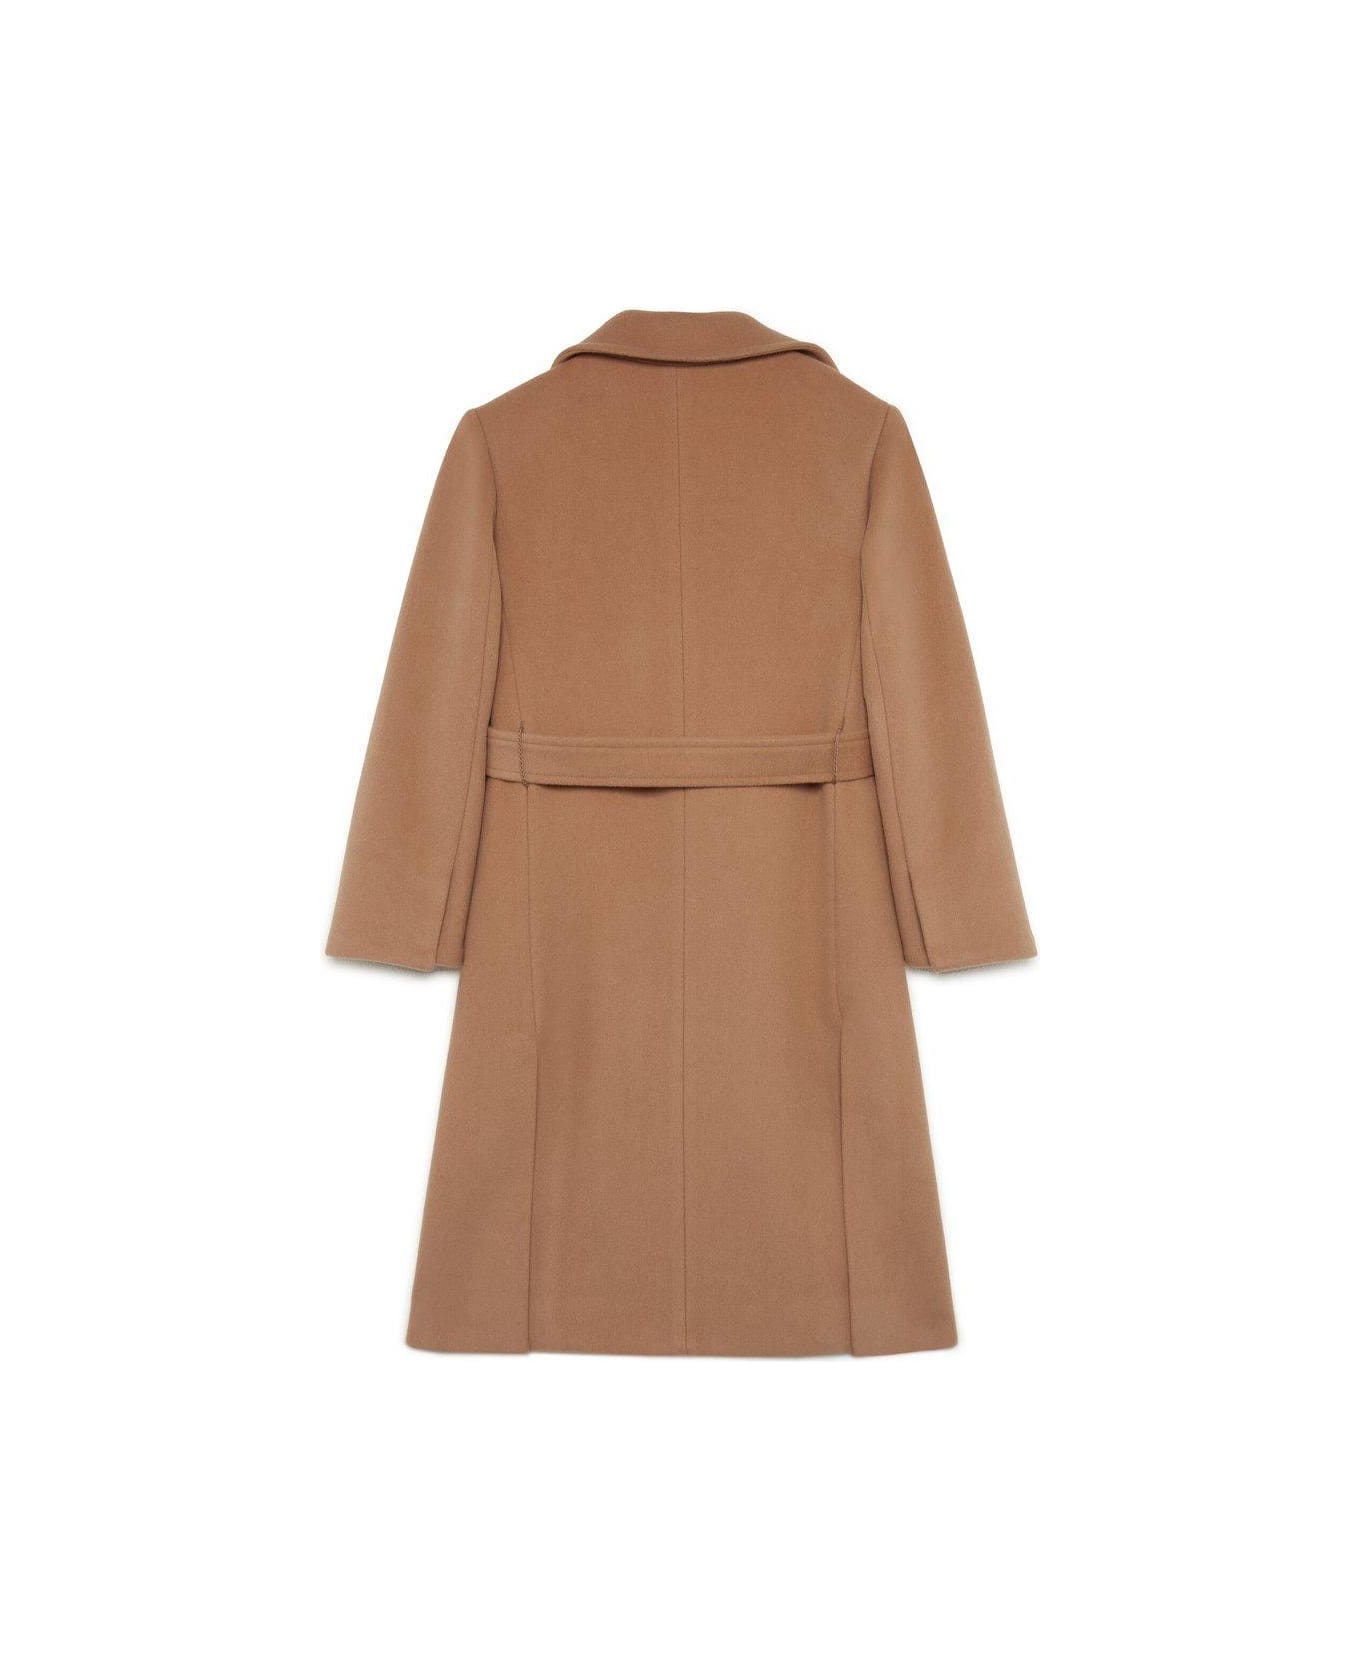 Max&Co. Belted Single-breasted Long Sleeevd Coat - Cammello